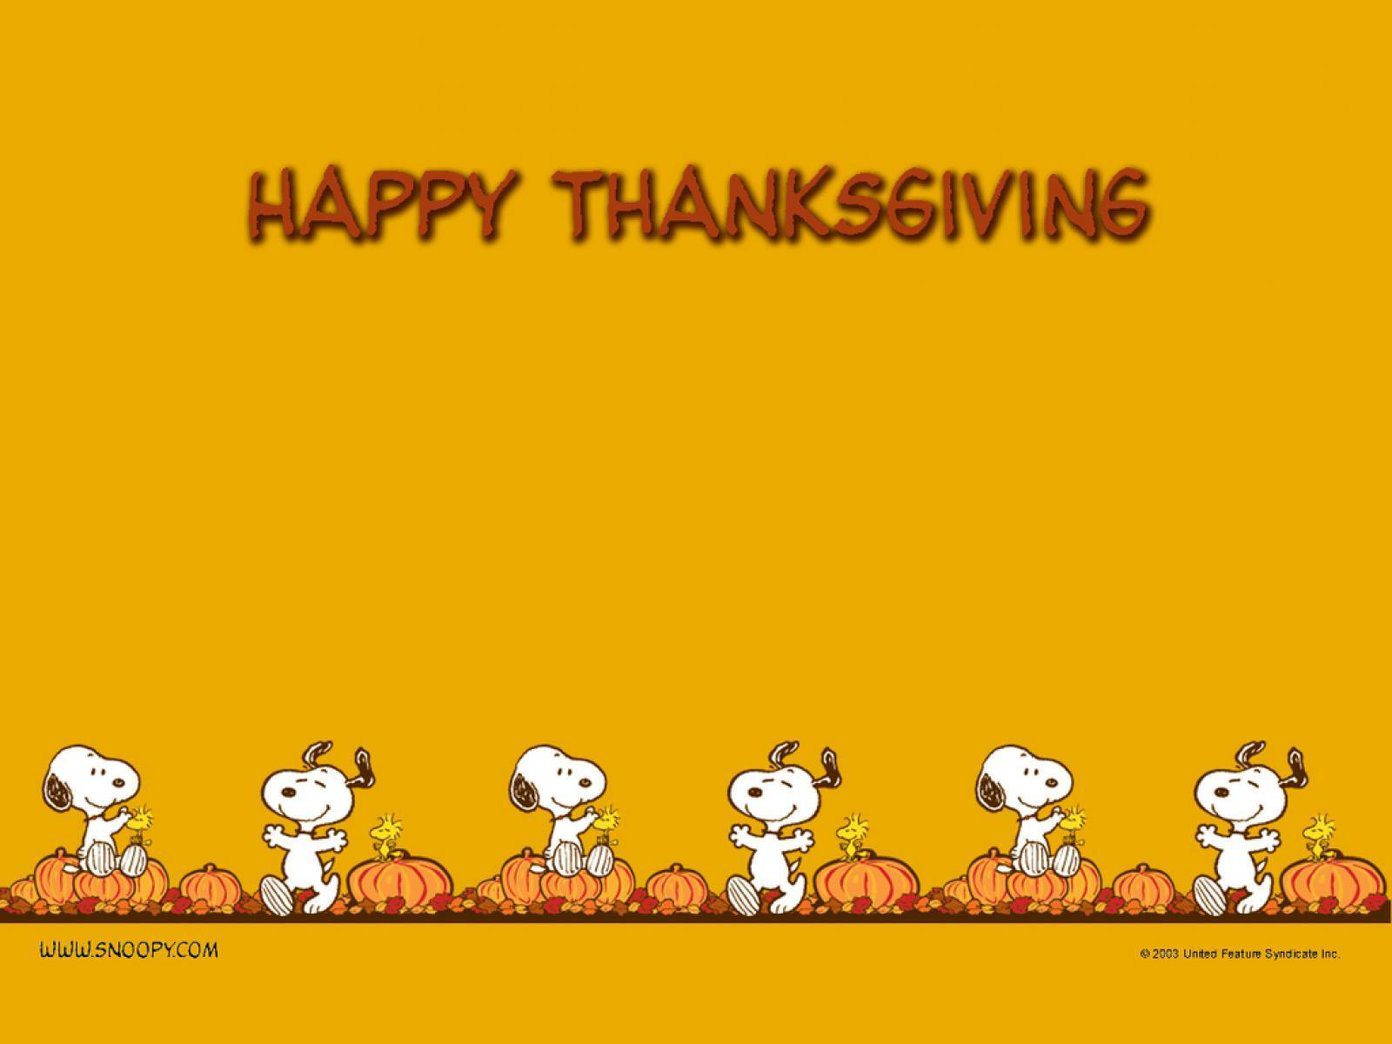 Cool Thanksgiving Wallpapers 2017 9